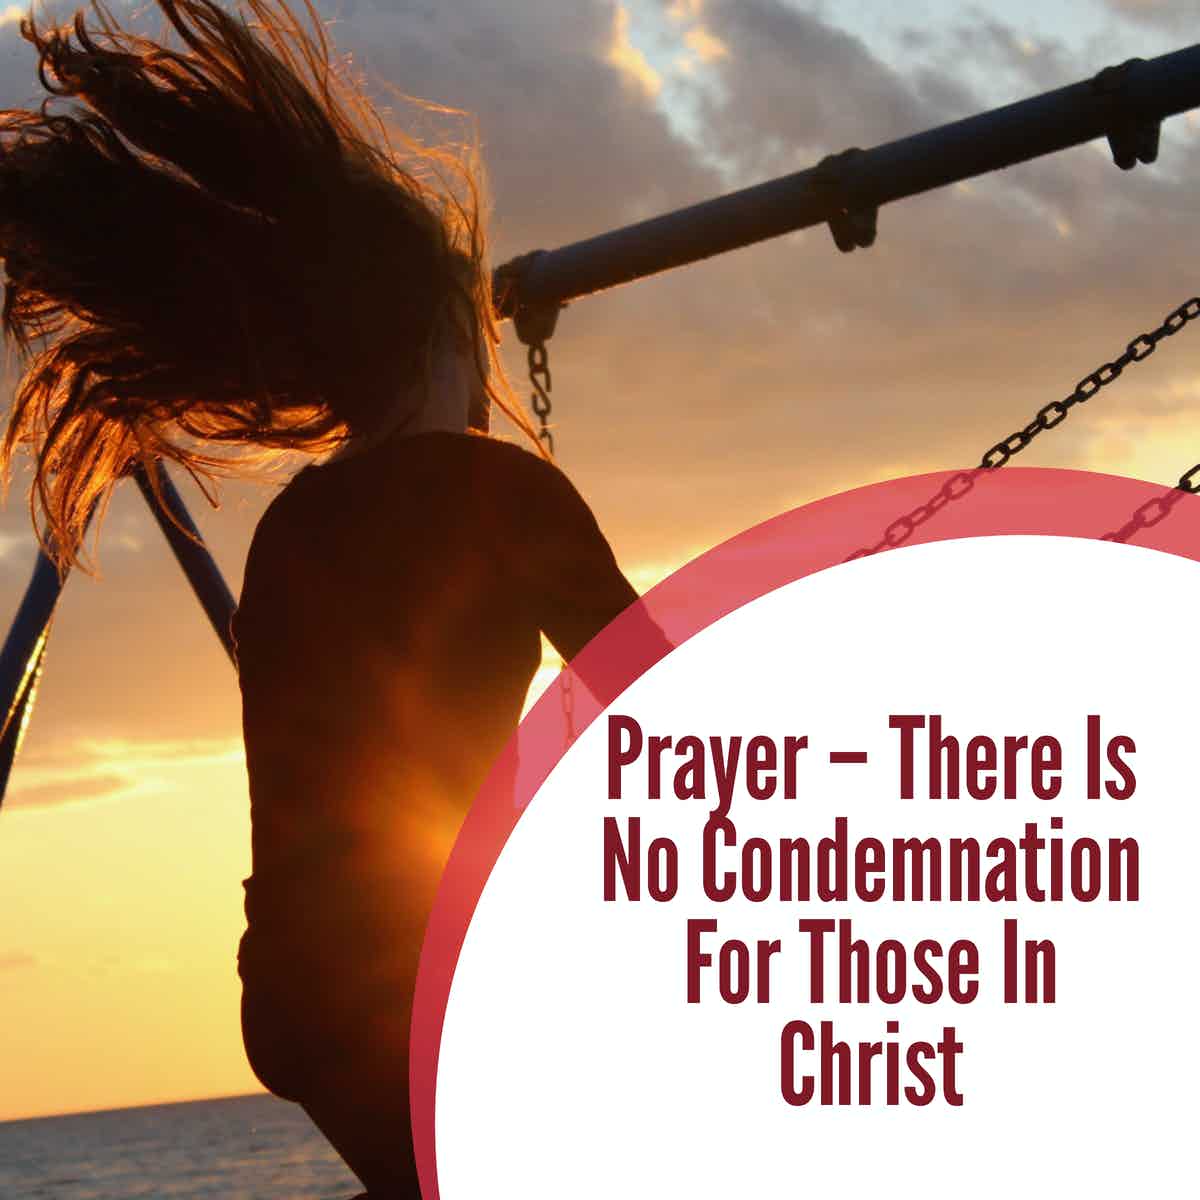 Prayer – There Is No Condemnation For Those In Christ